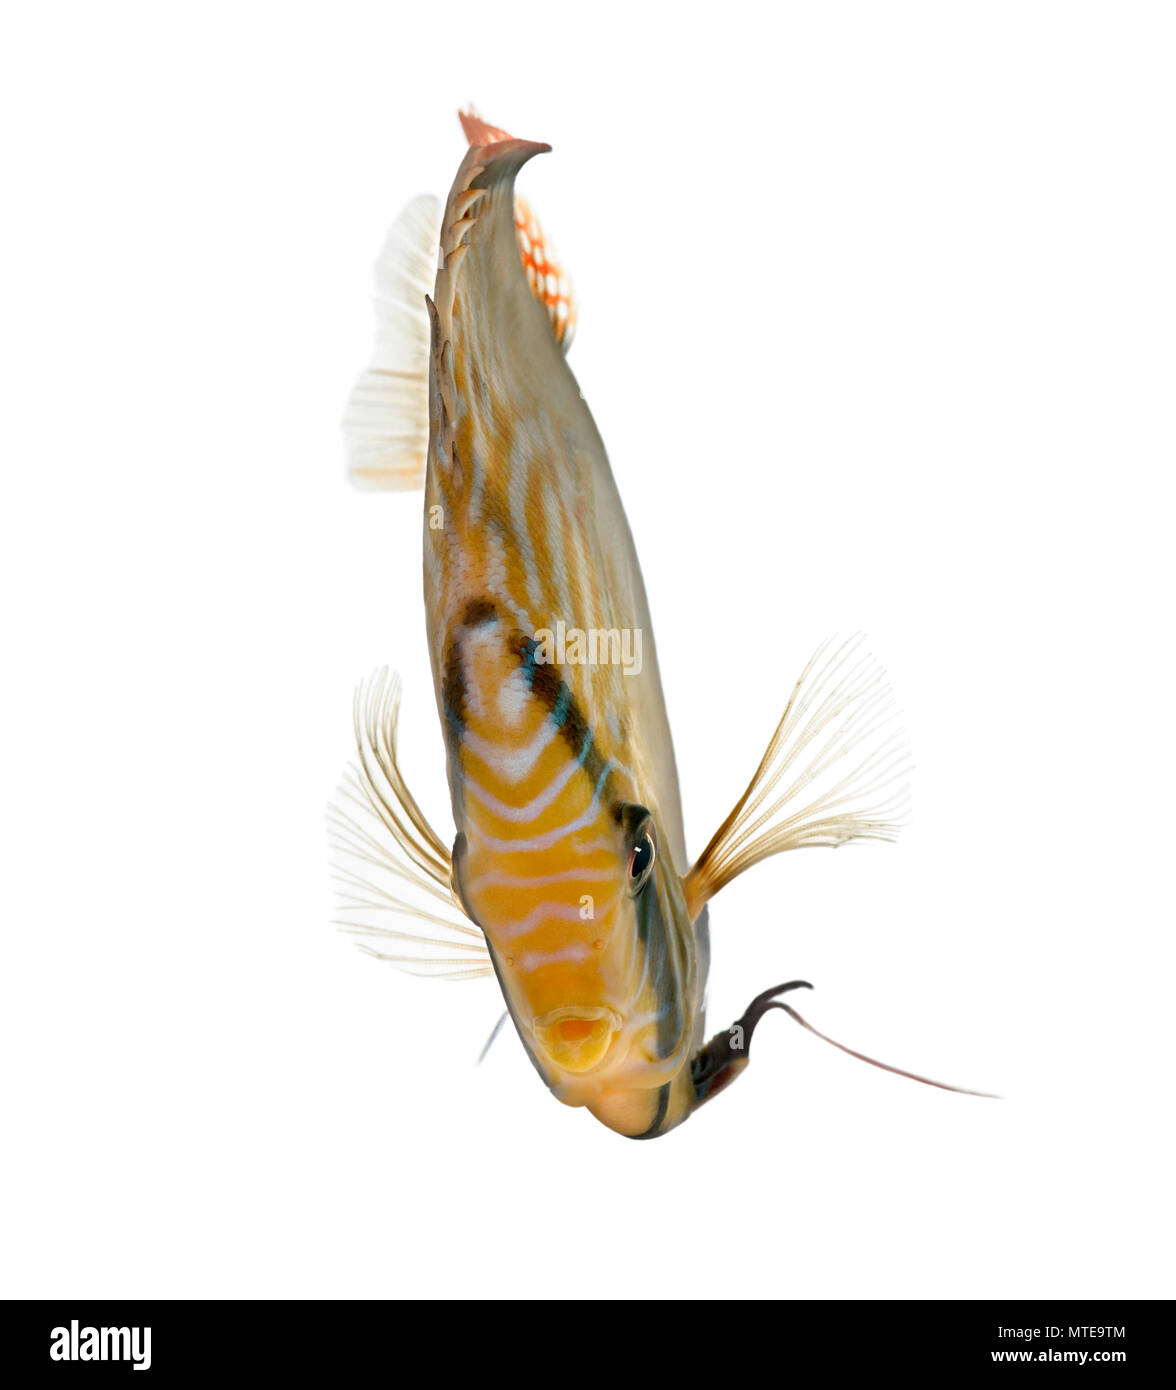 Red Turquoise Discus fish, Symphysodon aequifasciatus in front of a white background, studio shot Stock Photo